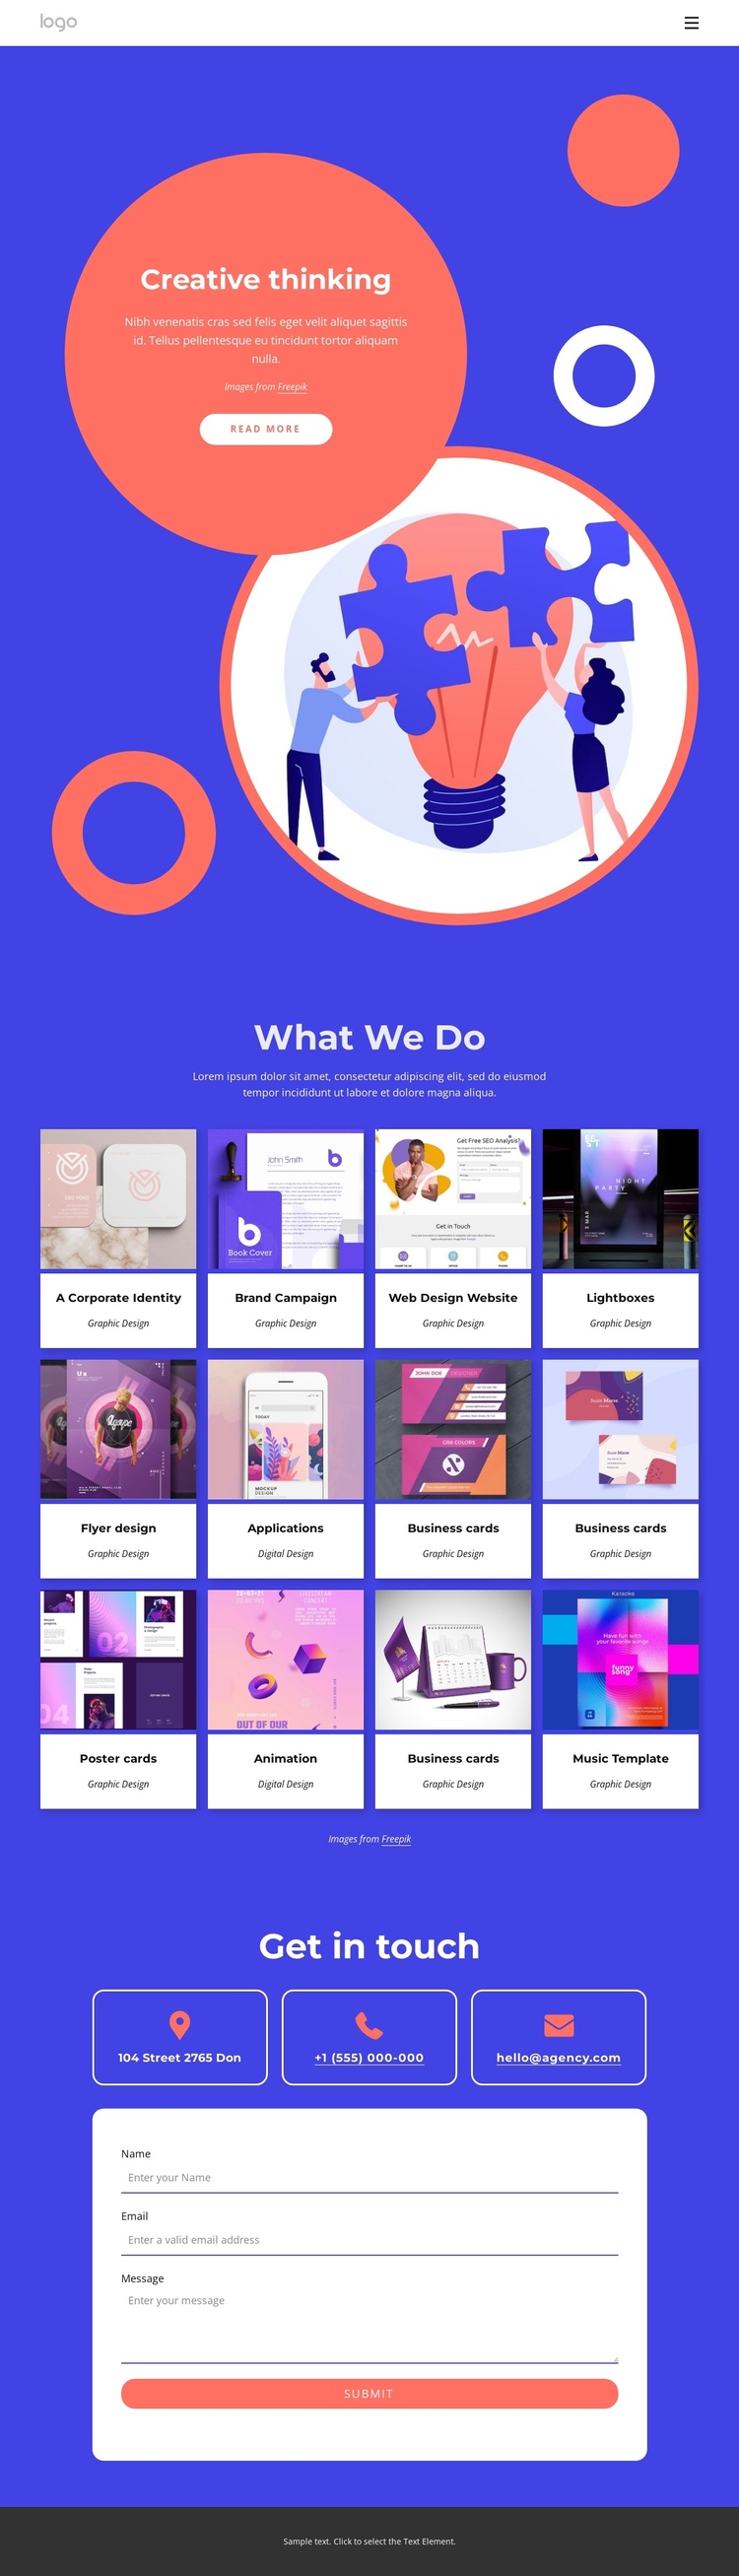 Campaigns, mobile and digital One Page Template